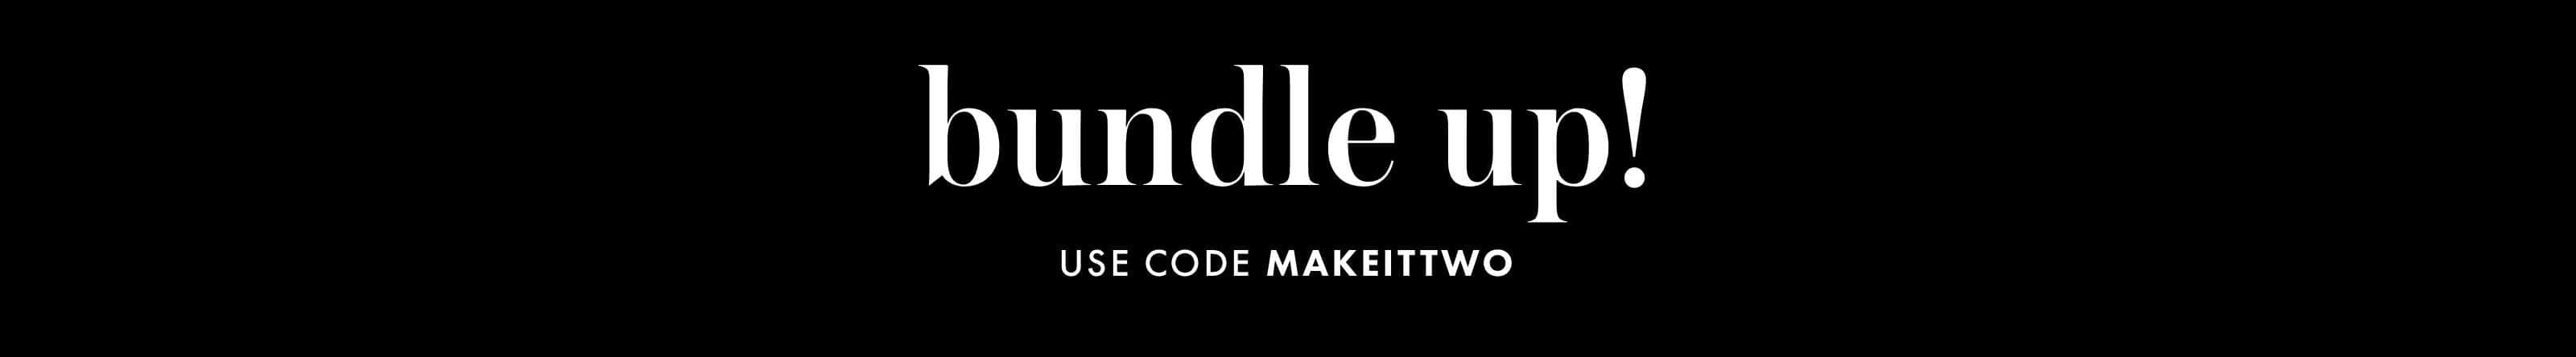 bundle up! use code makeittwo.